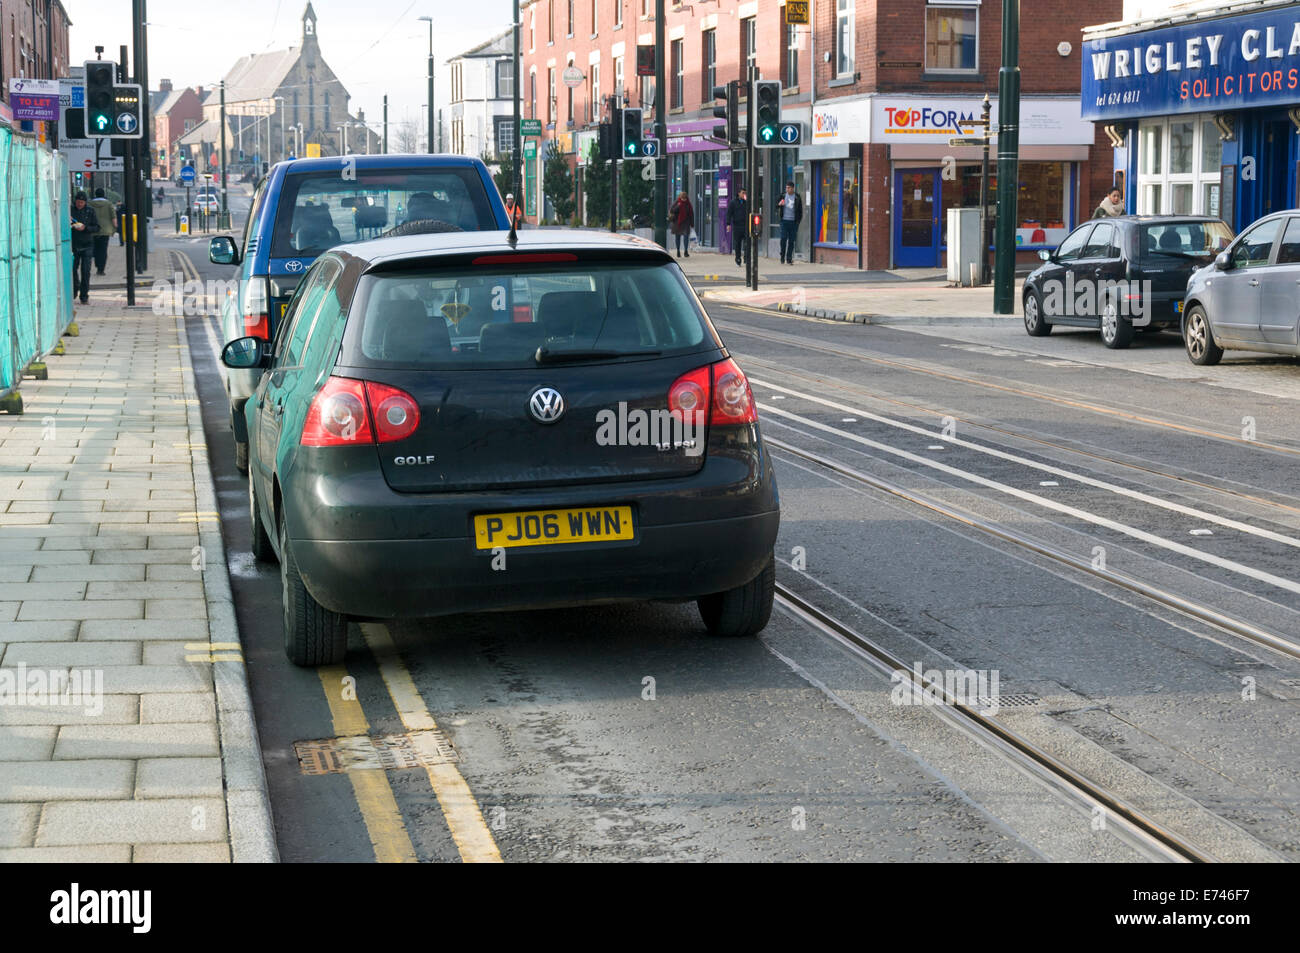 Two vehicles parked illegally and blocking the tram track, Union Street, Oldham, Greater Manchester, England, UK. Stock Photo